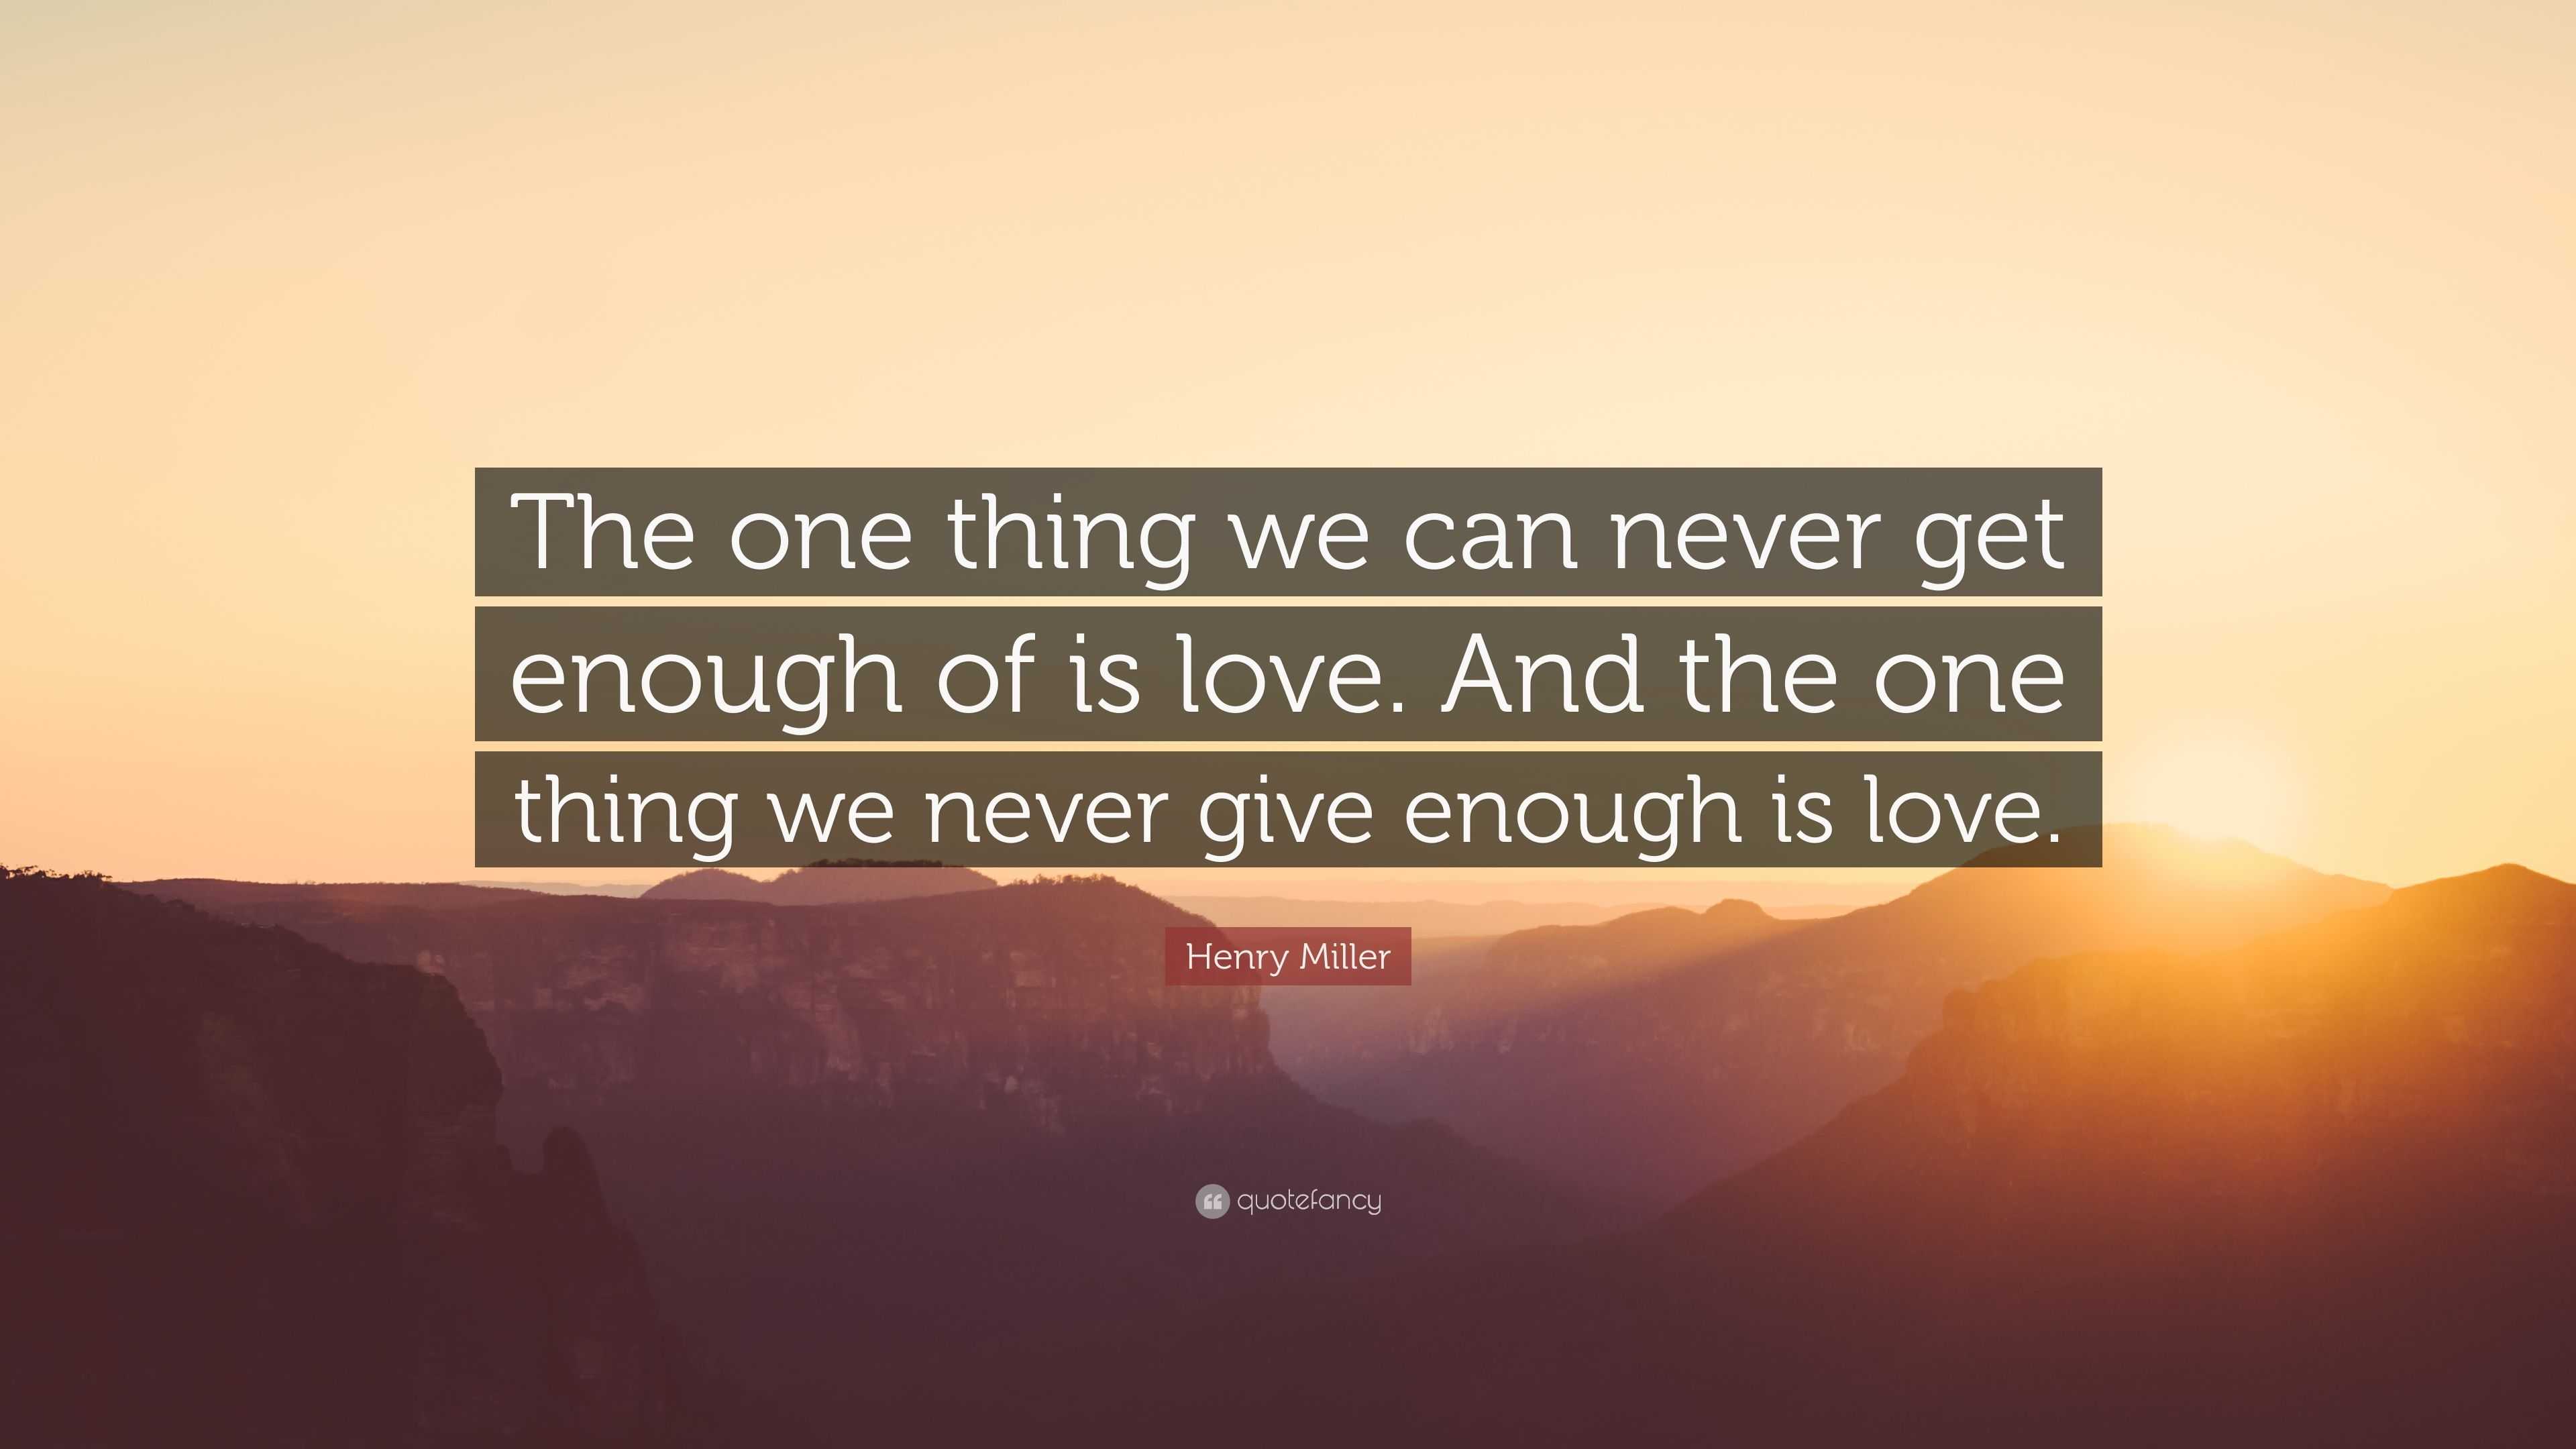 Henry Miller Quote “the One Thing We Can Never Get Enough Of Is Love And The One Thing We